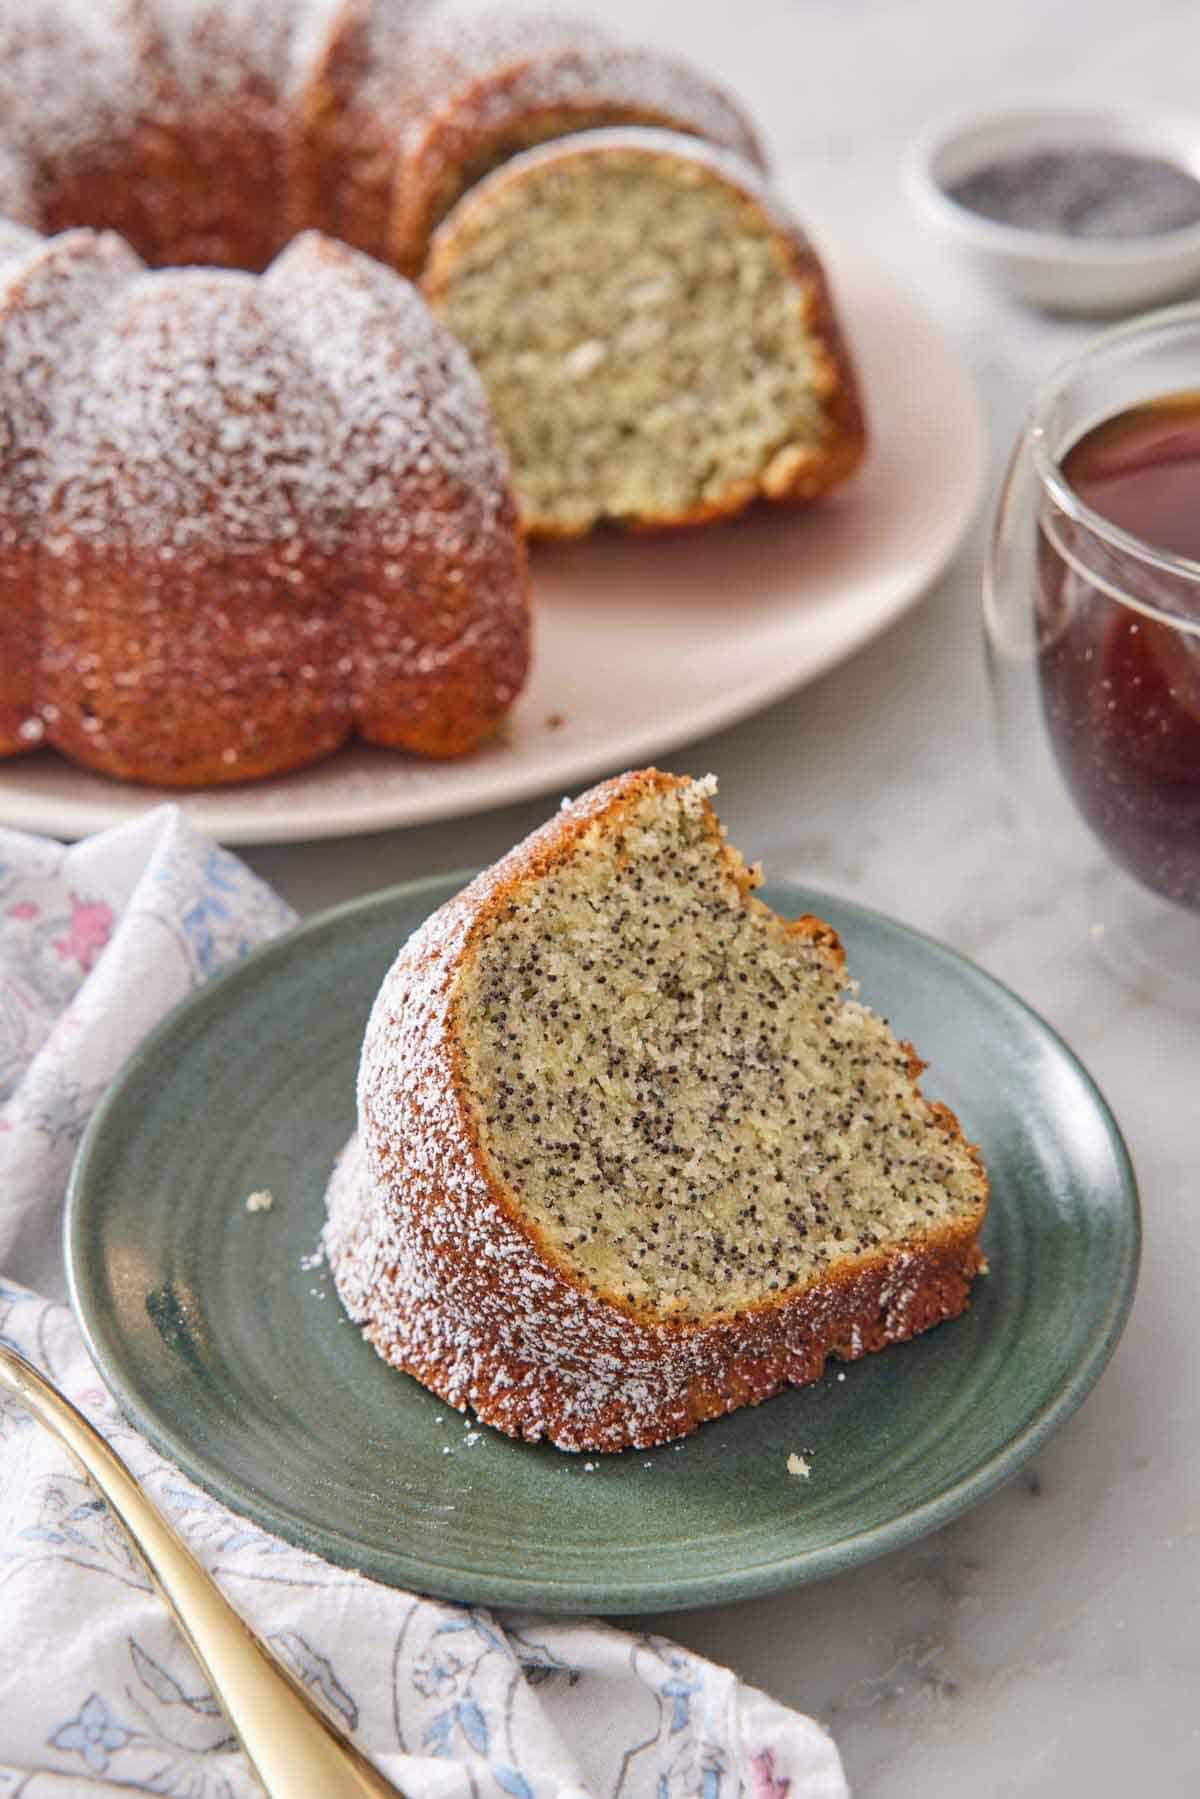 A slice of poppy seed cake on a green plate with the rest of the cake in the background.